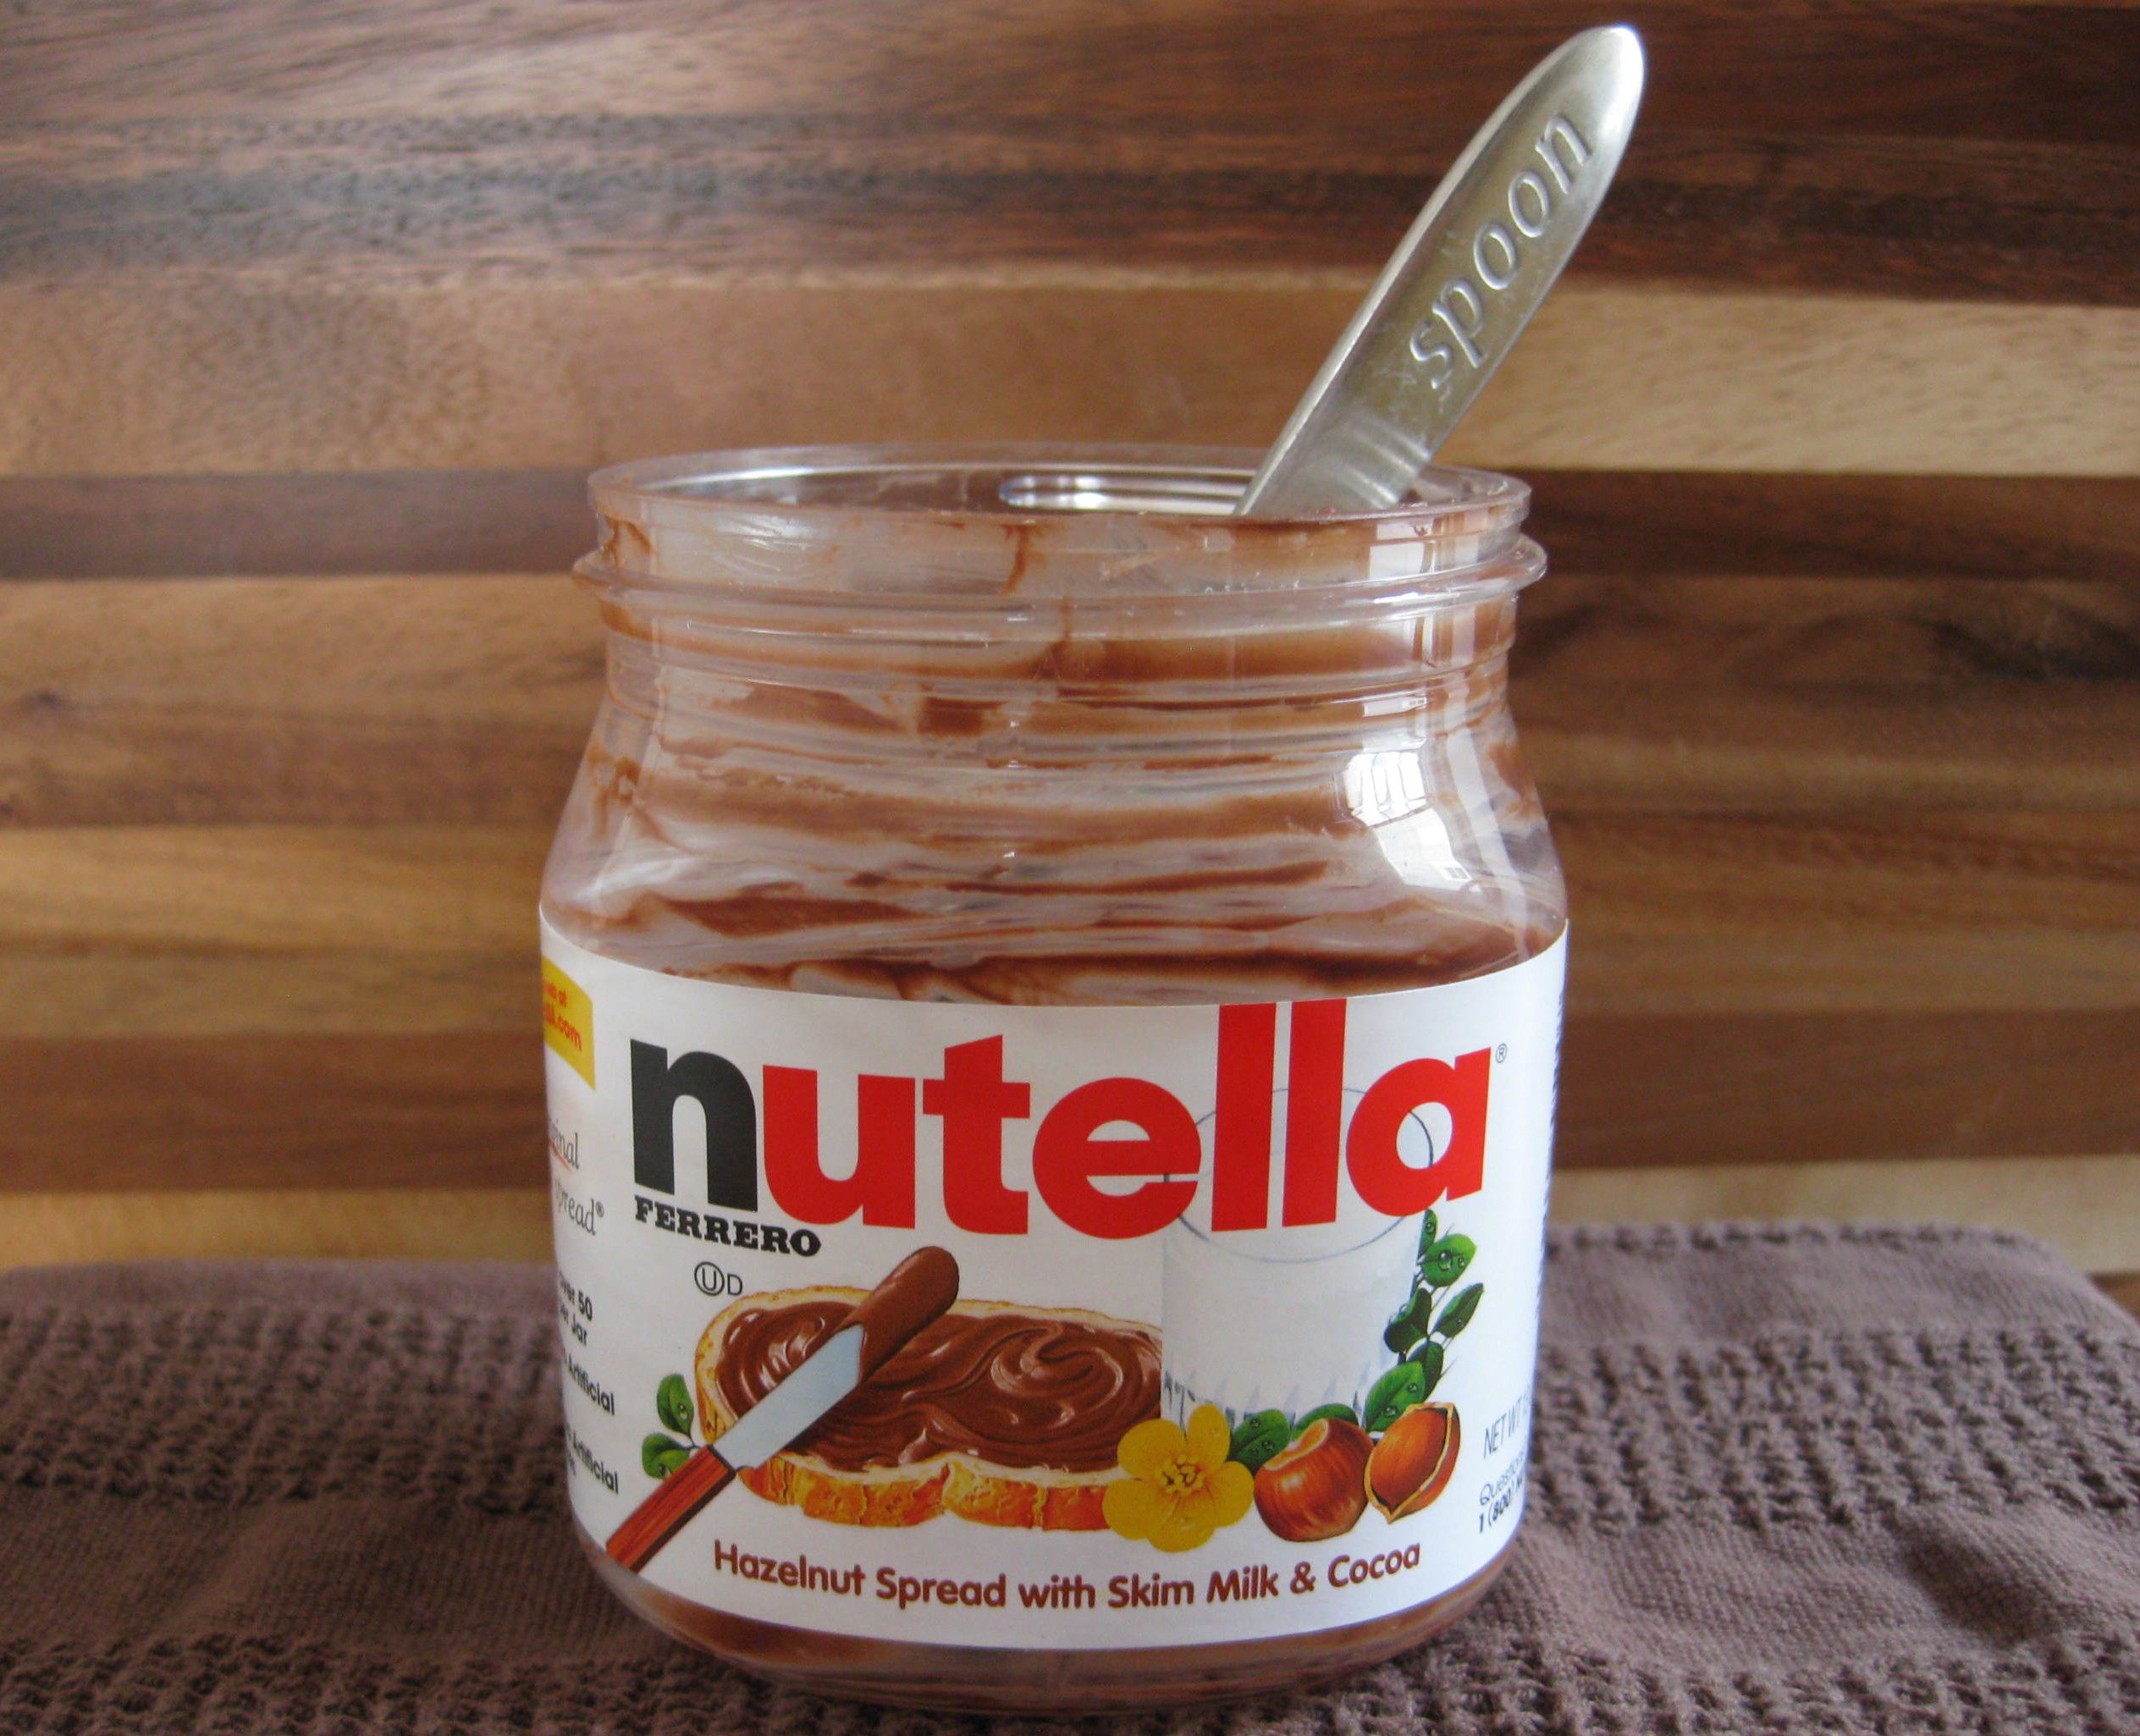 World Nutella Day 2011: Nutella and Bananas Are a Match Made in Heaven ...